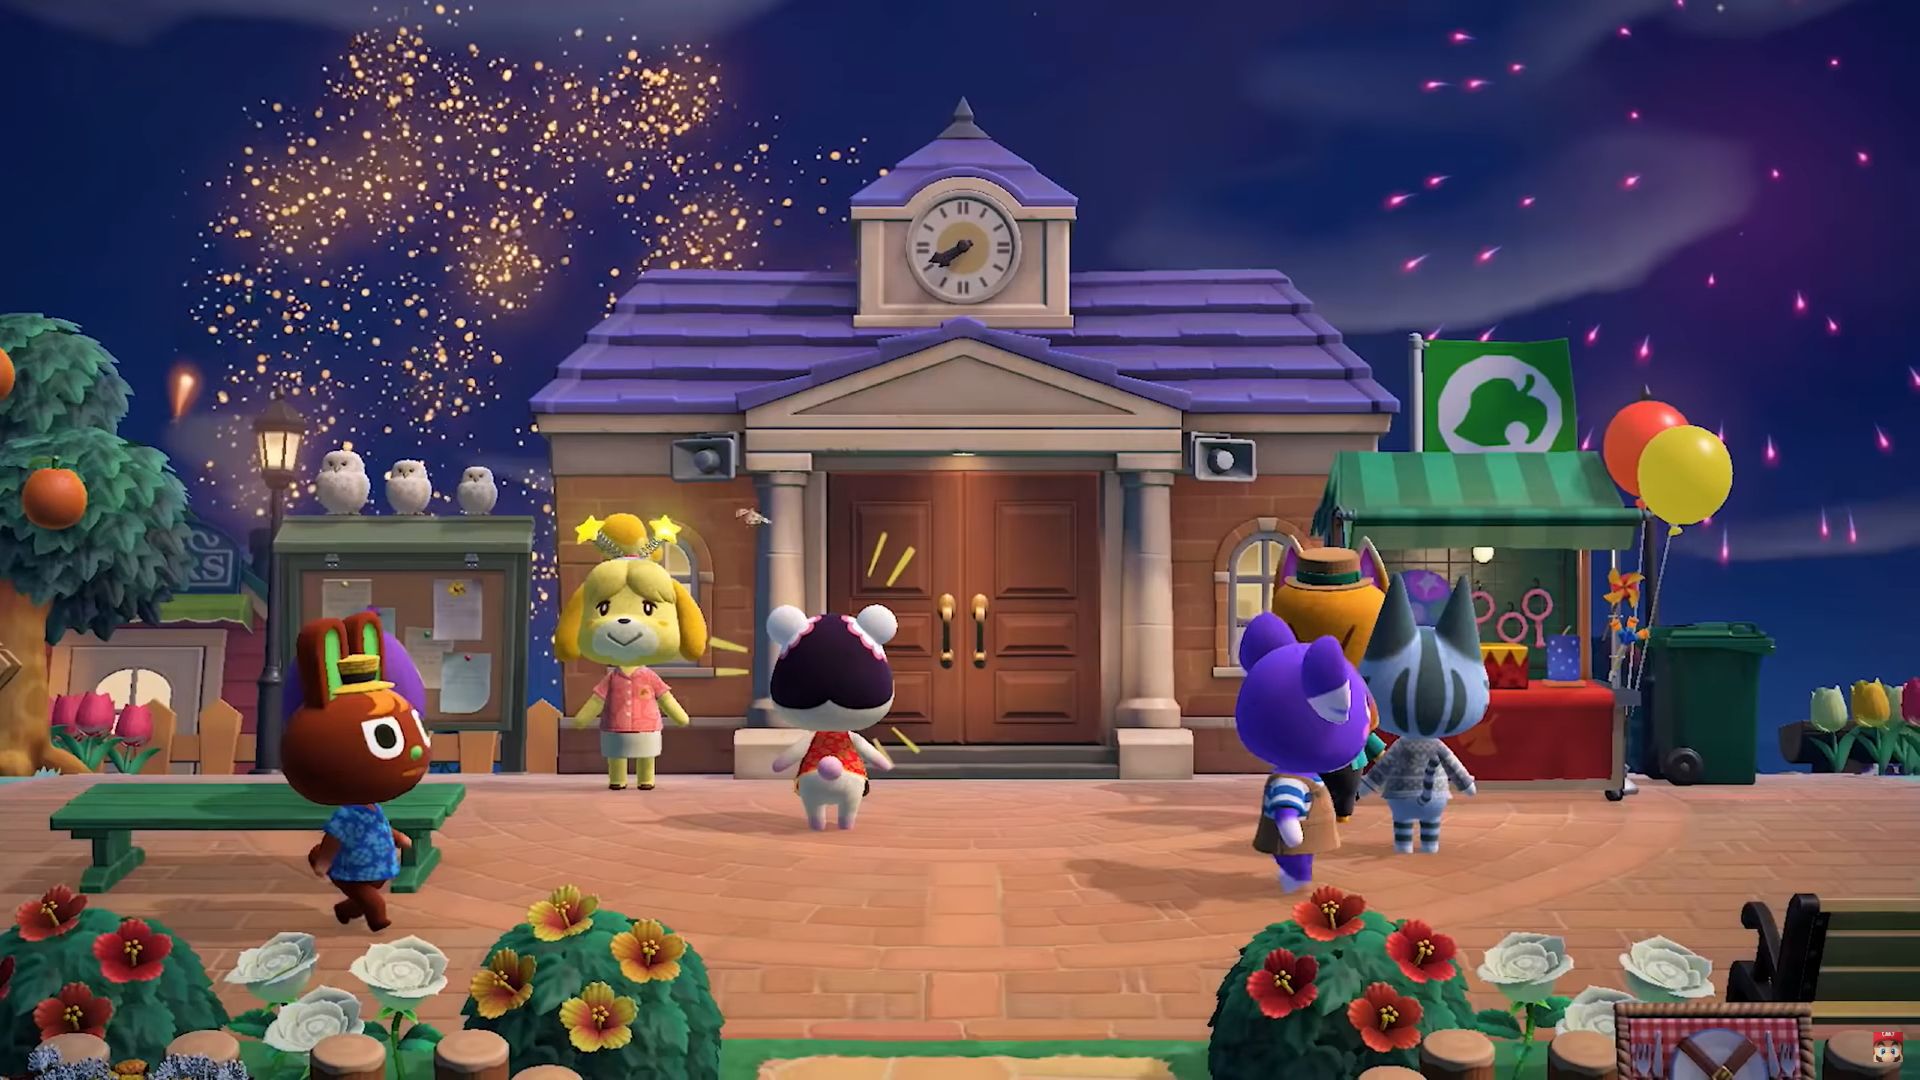 Animal Crossing New Horizons player and villagers celebrate fireworks show